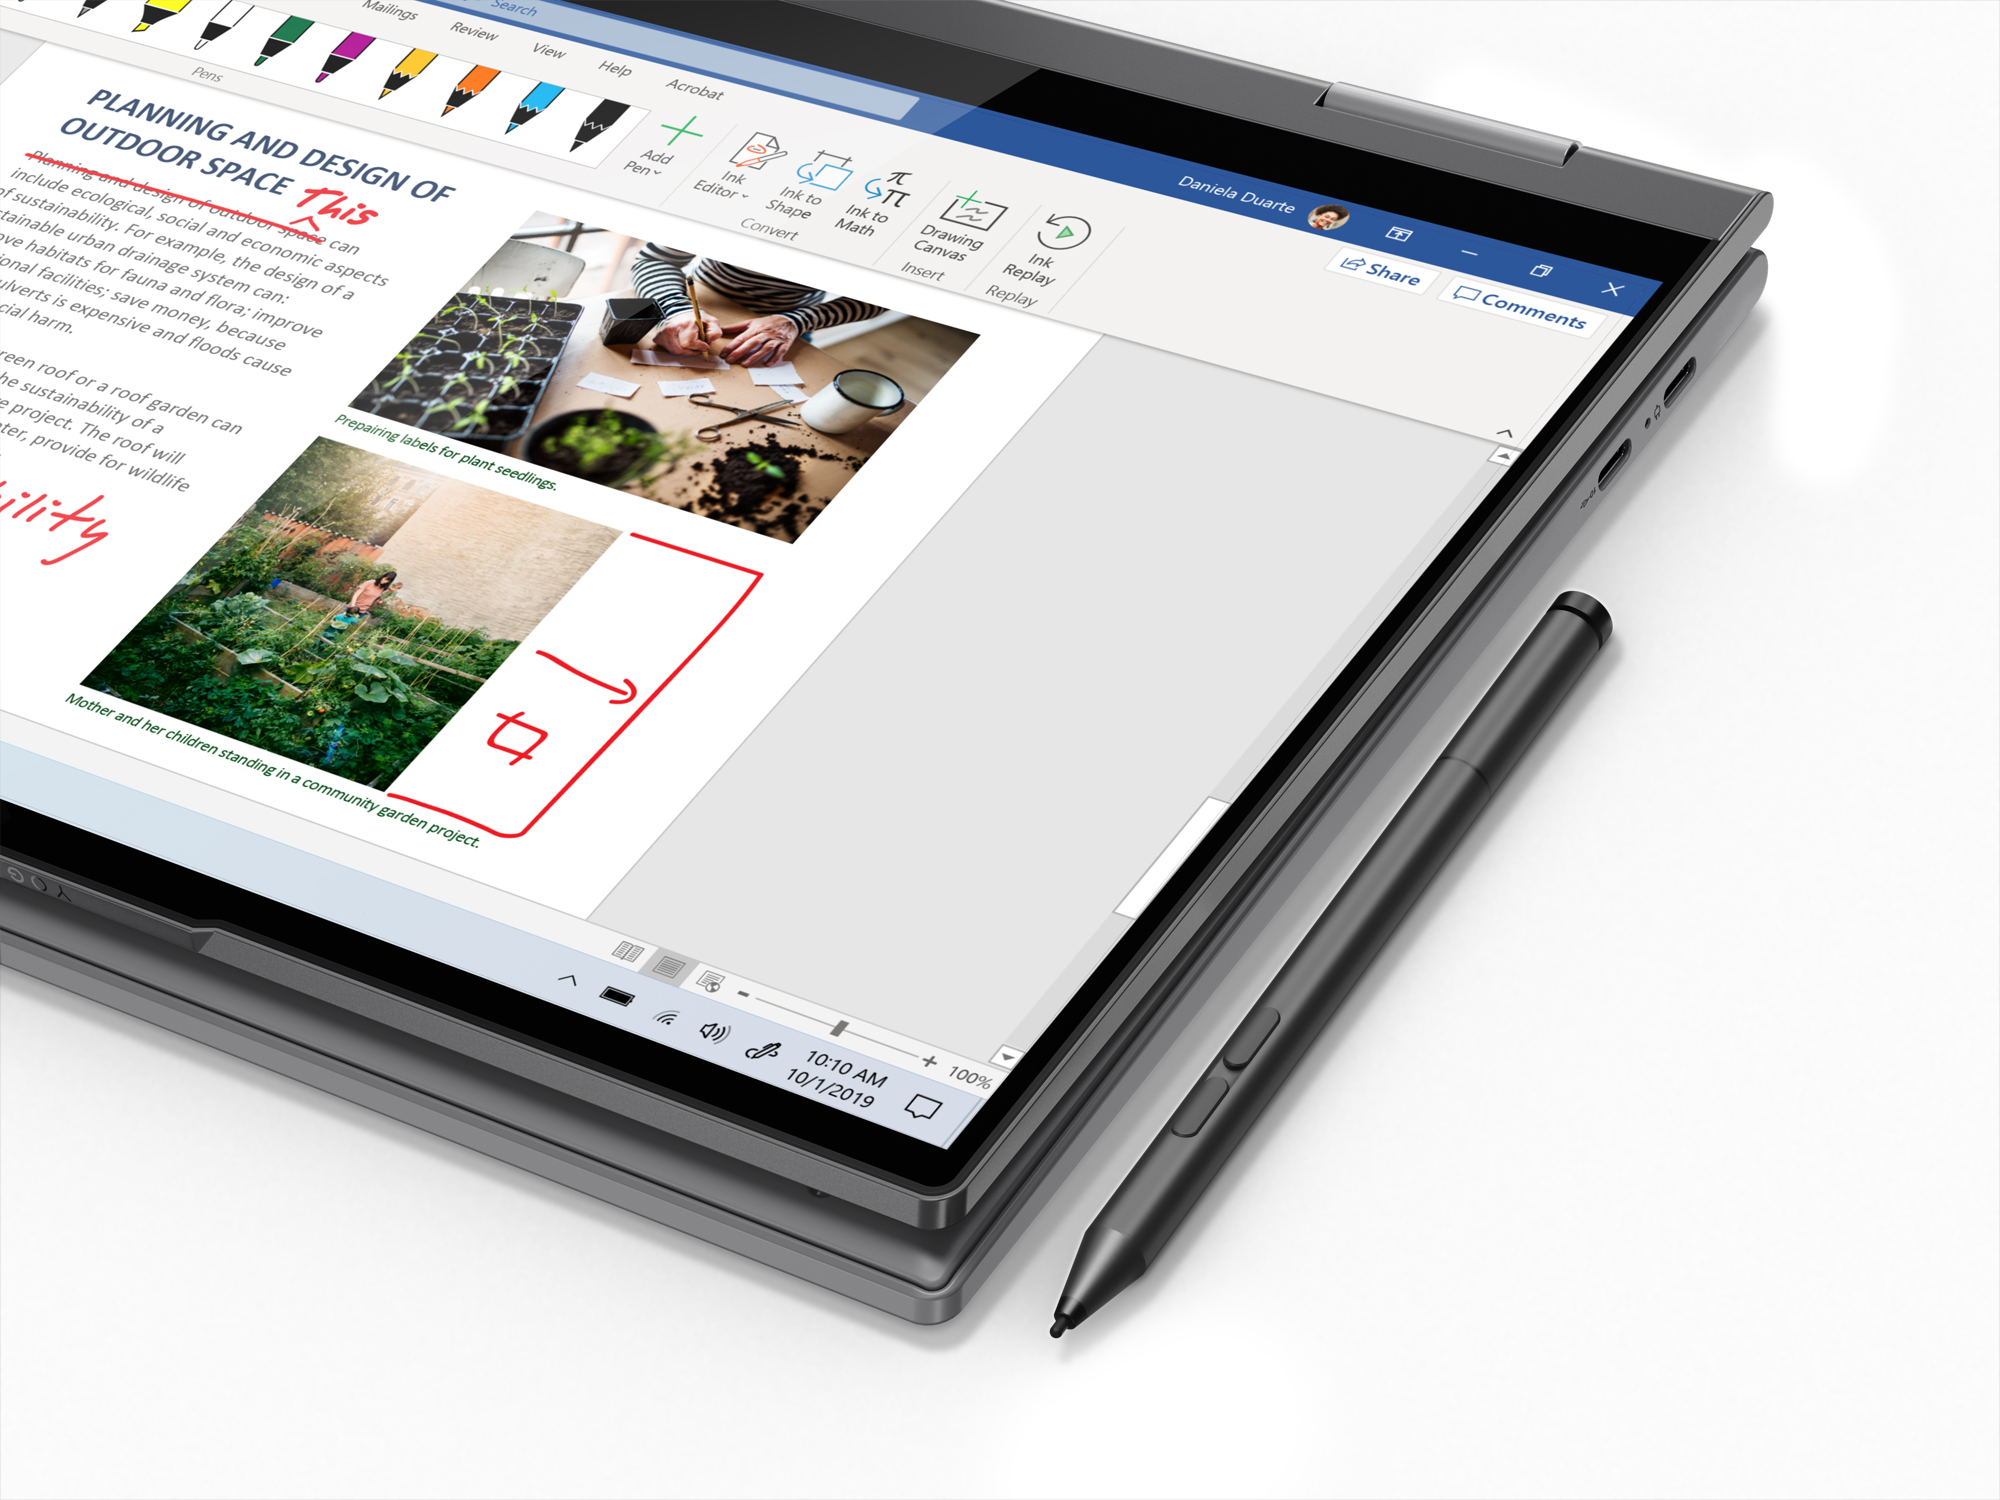 CES 2020: The Lenovo Yoga 5G with Qualcomm's 8cx and Support for 